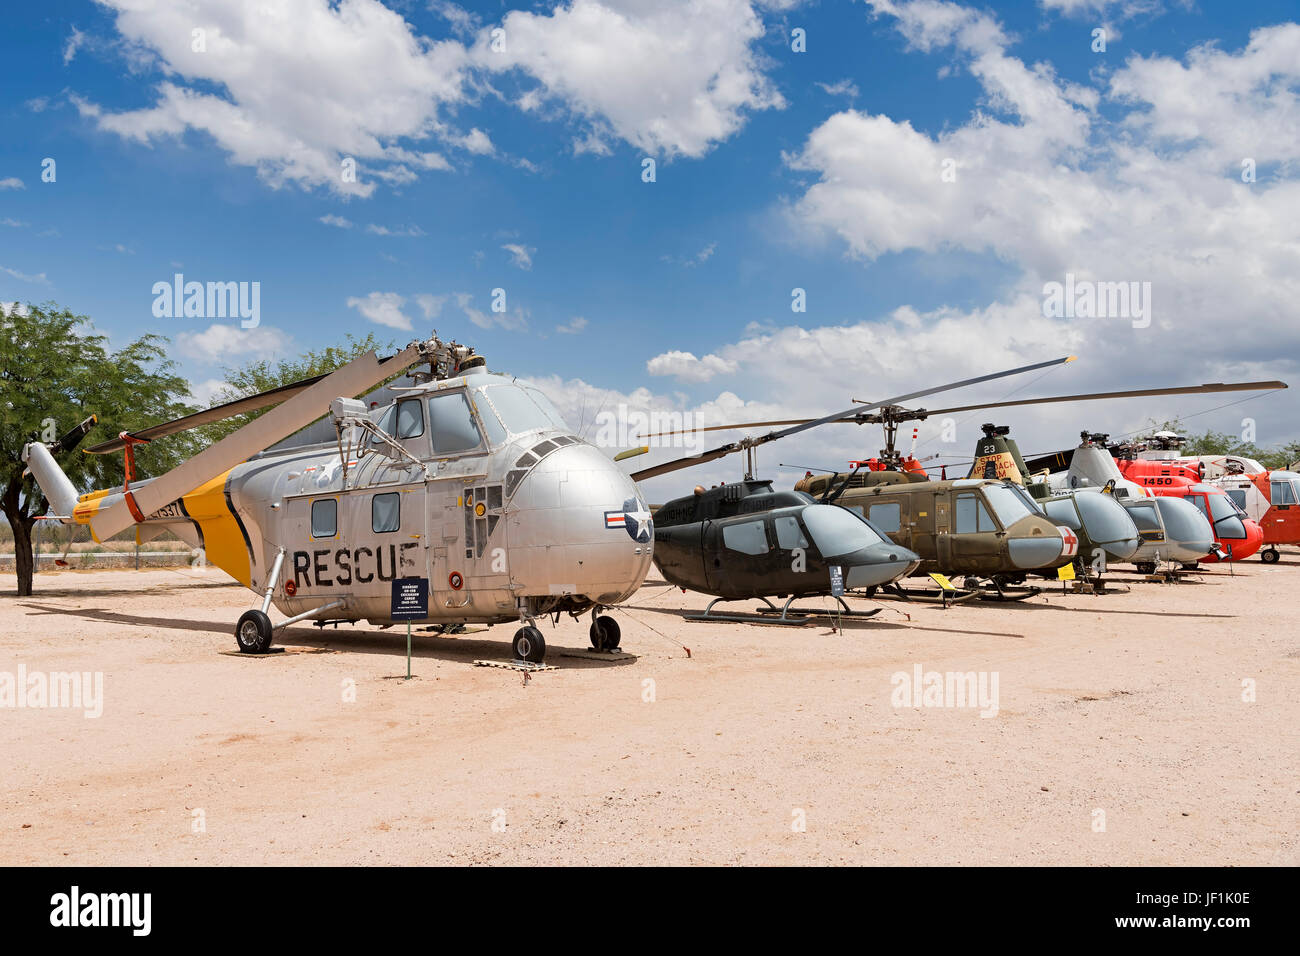 Rescue helicopter Sikorsky Chickasaw Cargo, 1949-1970, behind further helicopters, Pima Air and Space Museum, PASM, Tucson Stock Photo